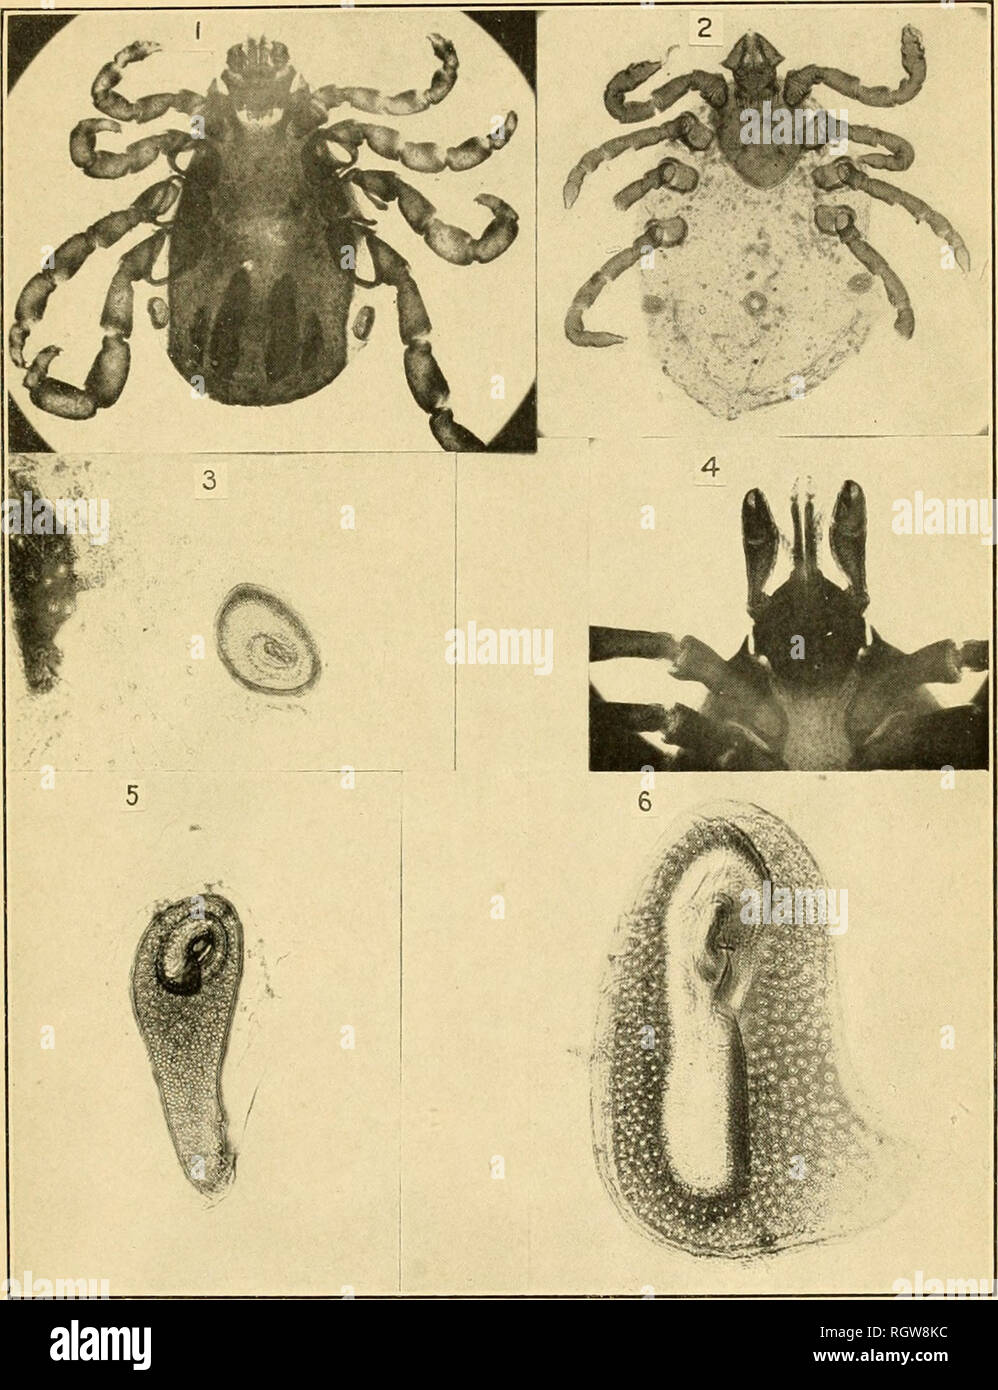 . Bulletin. Insects; Insect pests; Entomology; Insects; Insect pests; Entomology. Bui. 72, Bureau of Entomology, U. S. Dept. of Agriculture. Plate III.. The North American Fever Tick and Other Species. FiK. l.—Margaropusanniilatuif, male. Fig. •I.—Ifynmphi/mlisl.eporis-pnfiistn'.'^. female. Fig. 3.—Stig- mal plate'of Margnropm anmdntutt. male. Fitr. -4.—Month parts of Lmiles cookei. Fig. 5.—Stig- mal plate of Rhipkephalm sp., male. Fig. 6.—Stigmal plate of Amblyoinma mariilatiim. female. Figs. 1. 2, much enlarged; fig. 4, more enlarged; fig.s. 3, 5, 6, highly magnified. {Original.). Please not Stock Photo